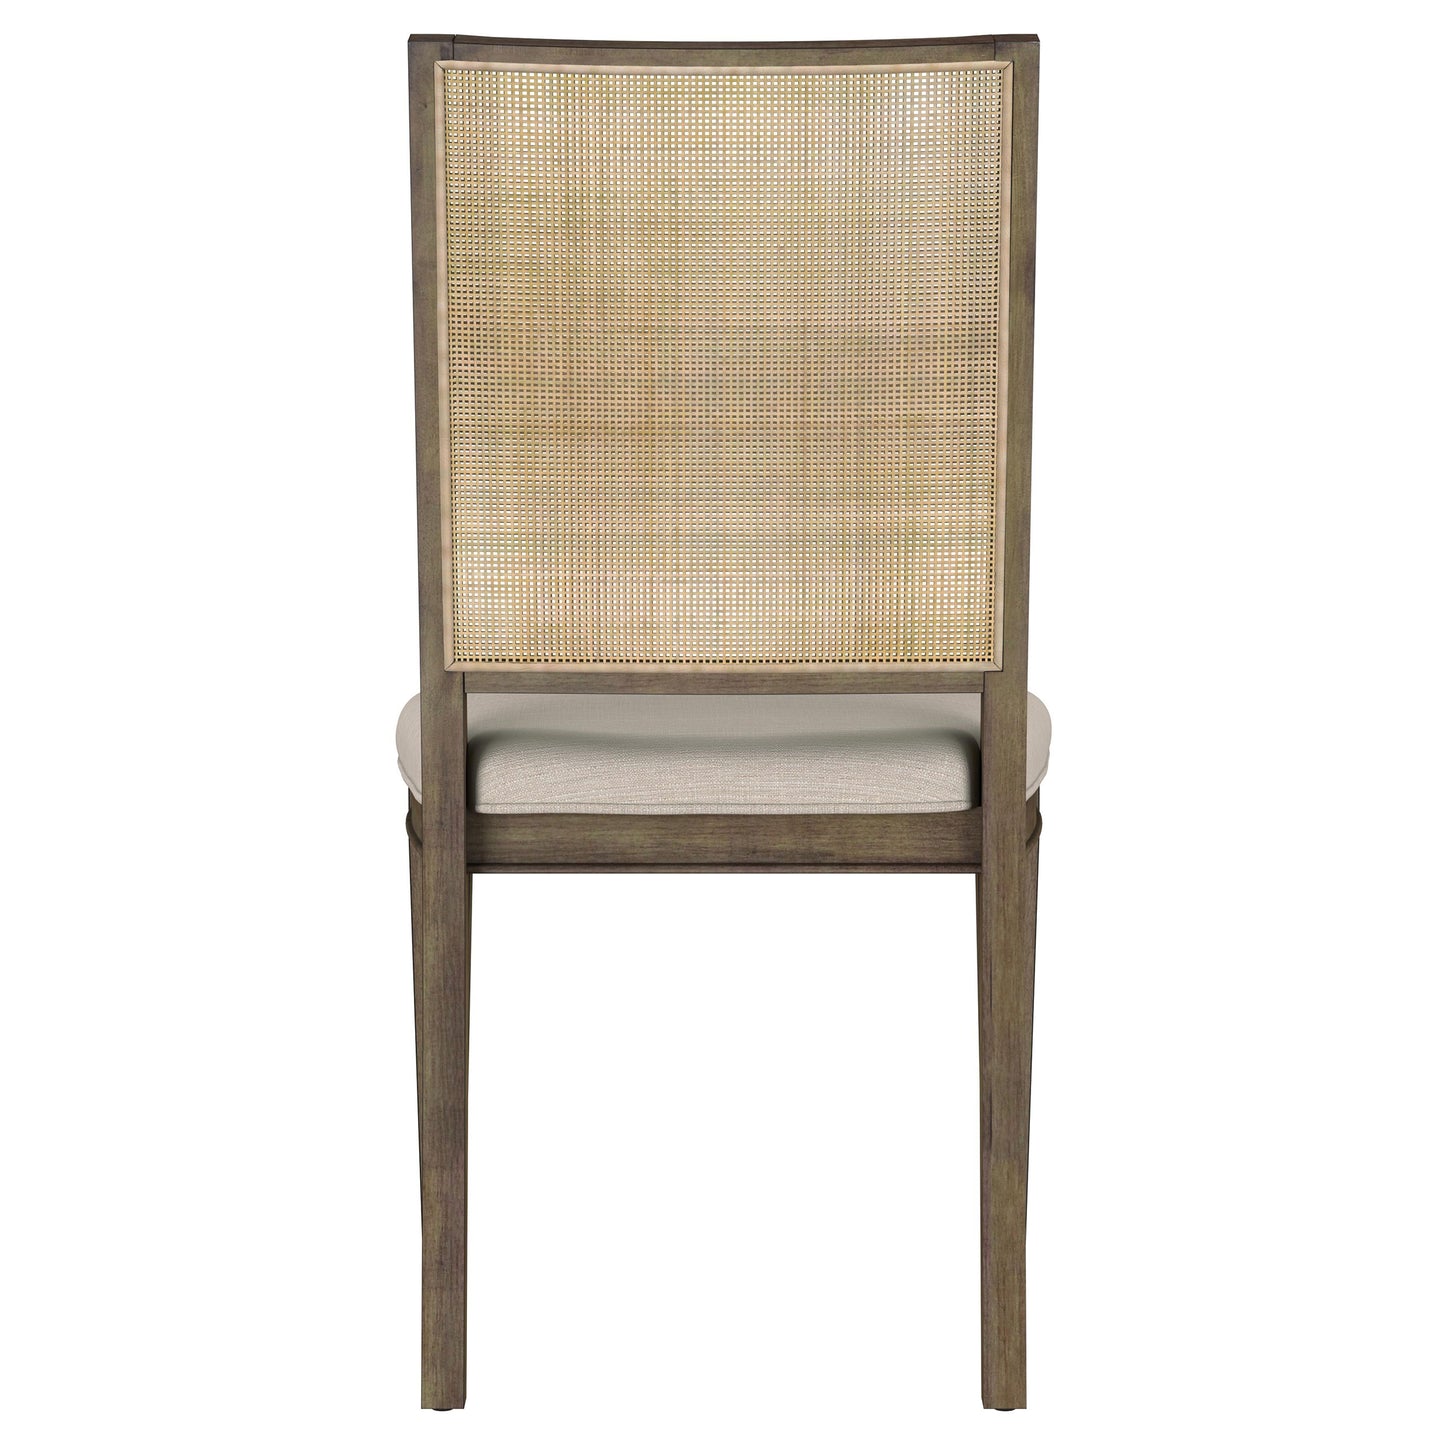 Matisse Woven Rattan Back Dining Side Chair Brown (Set of 2)